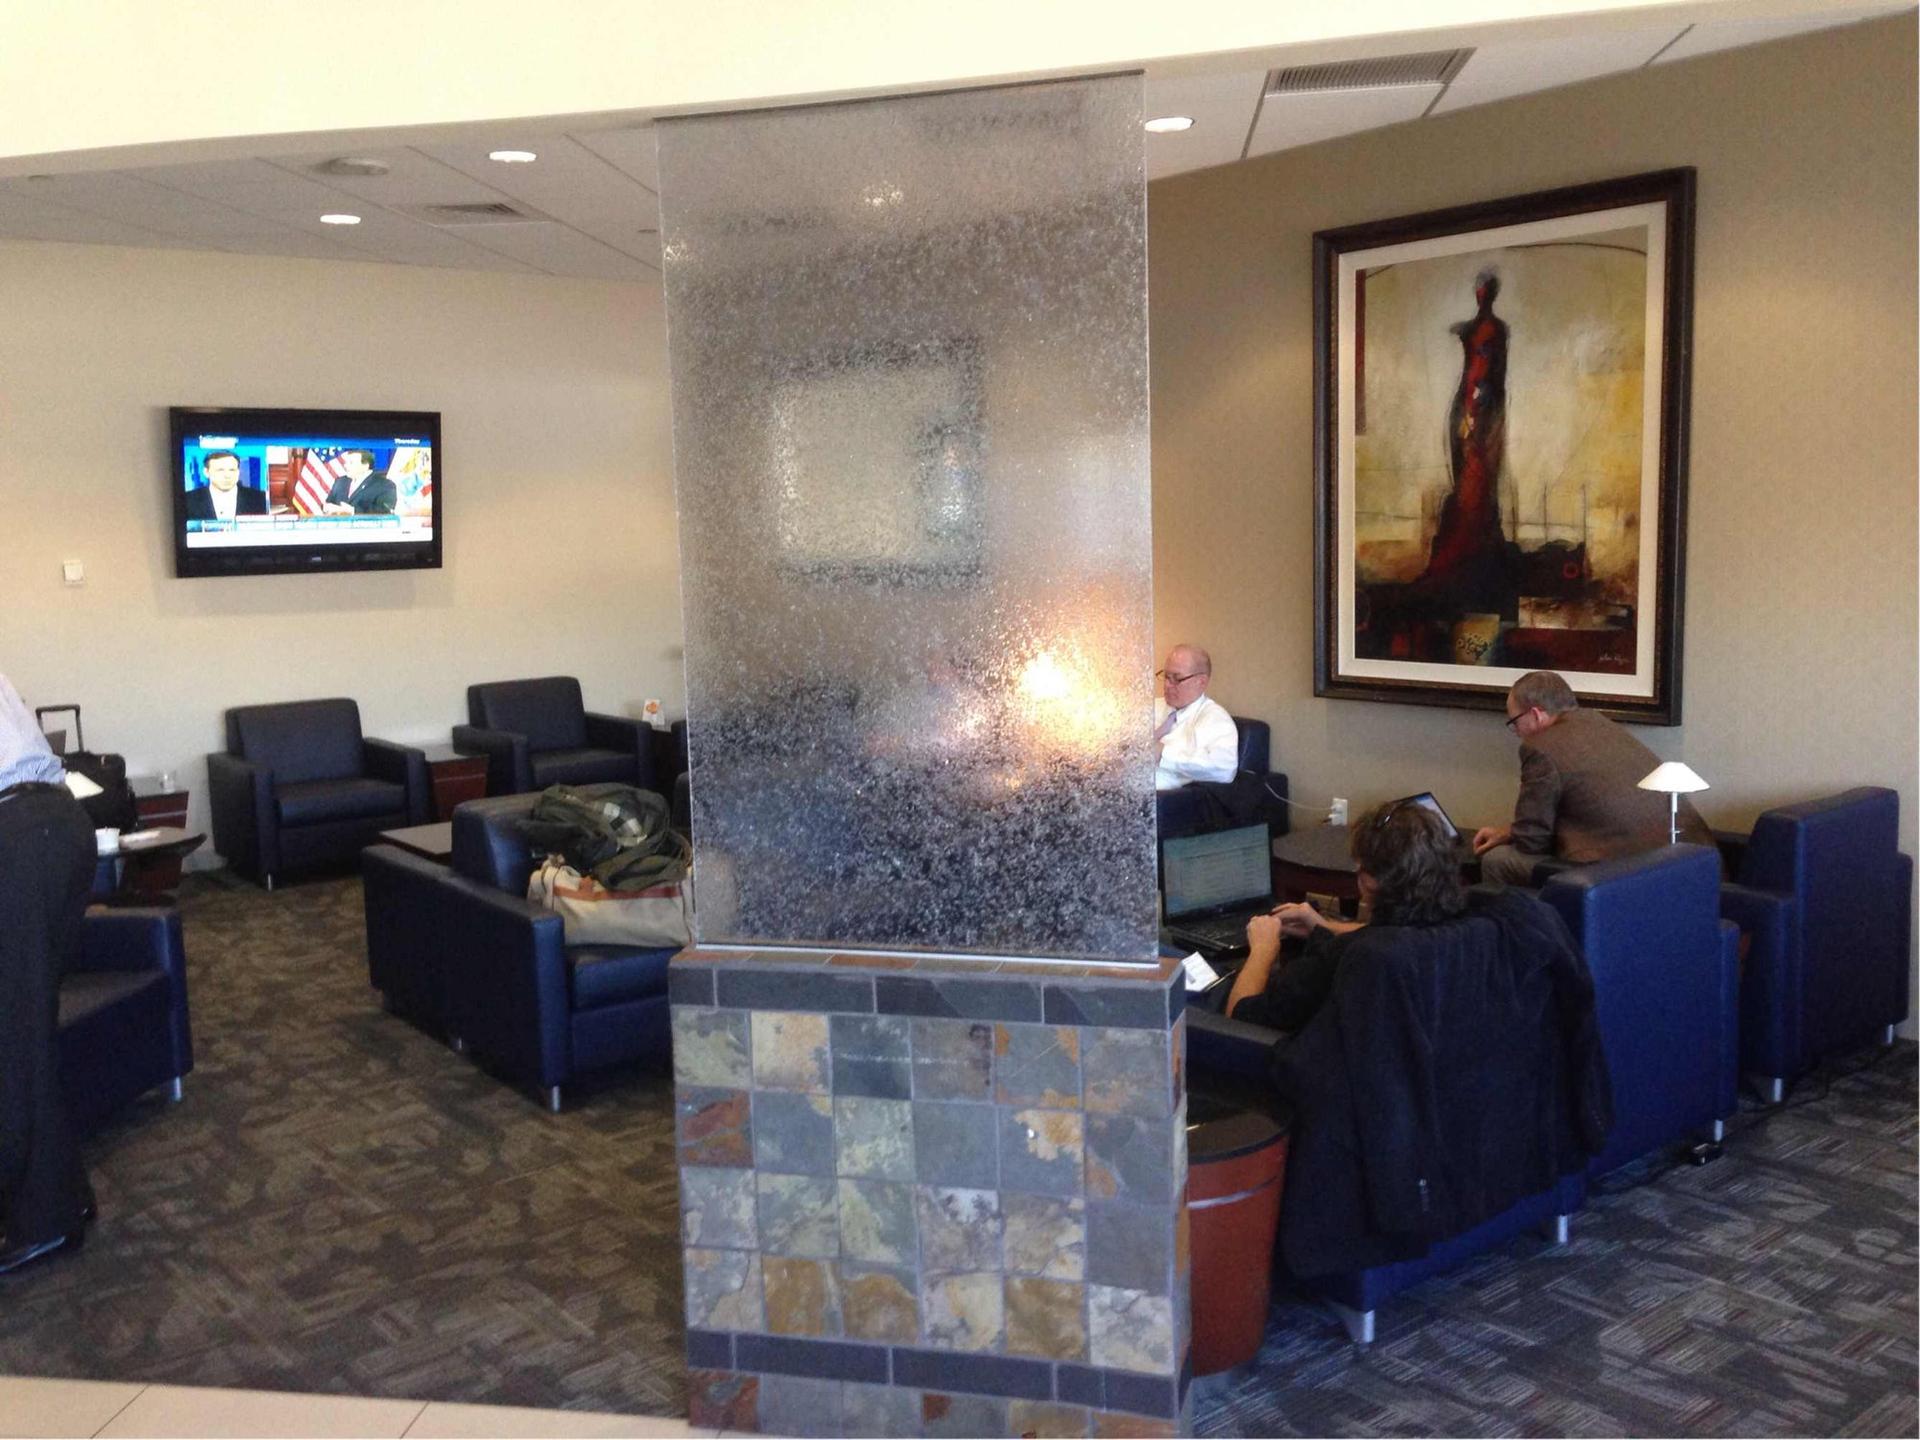 American Airlines Admirals Club (Gates A19-A21) image 5 of 16